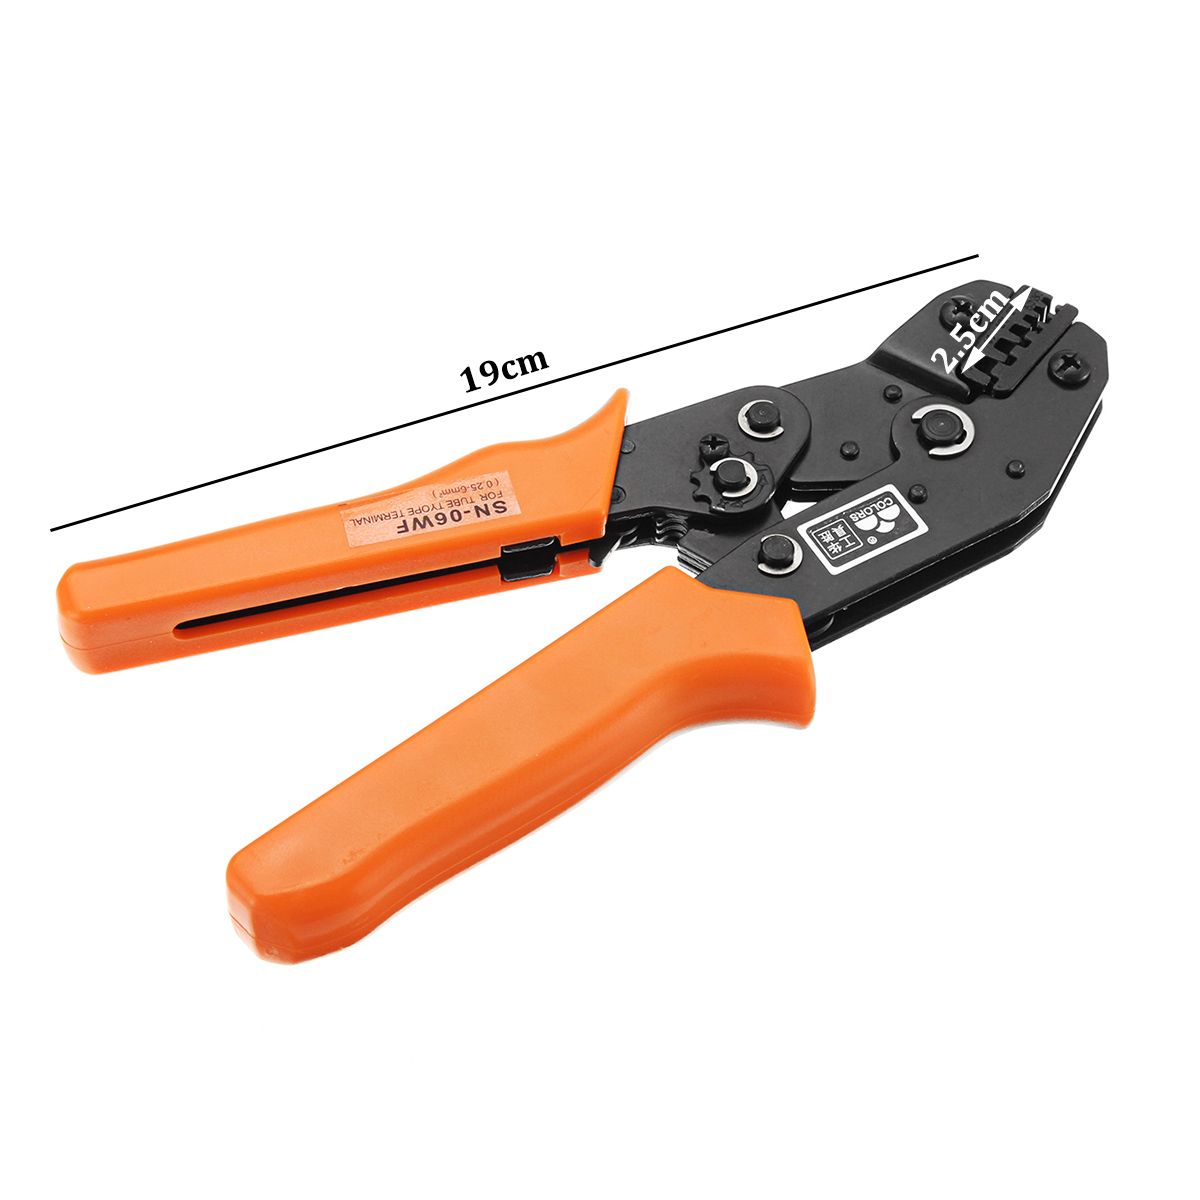 Electrical-Ratchet-Crimping-Pliers-Tool-with-800-Wire-Stripper-Crimper-Terminal-Kit-1243623